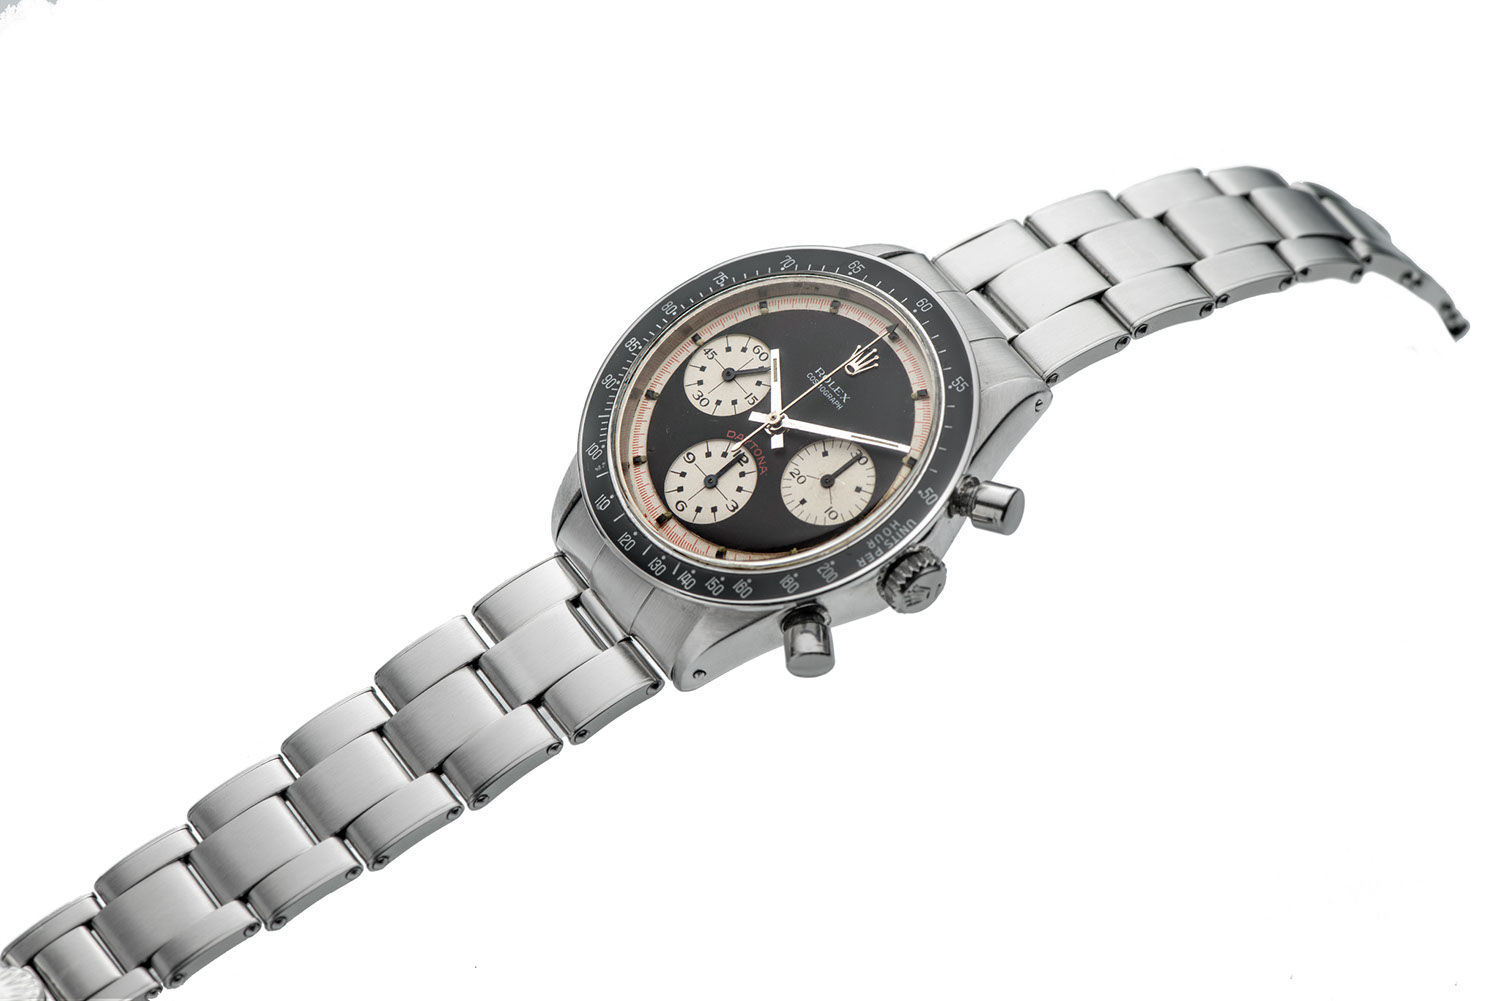 A reference 6241 Paul Newman Daytona that sold for $185k at Antiquorum’s March 2020 Private Sale